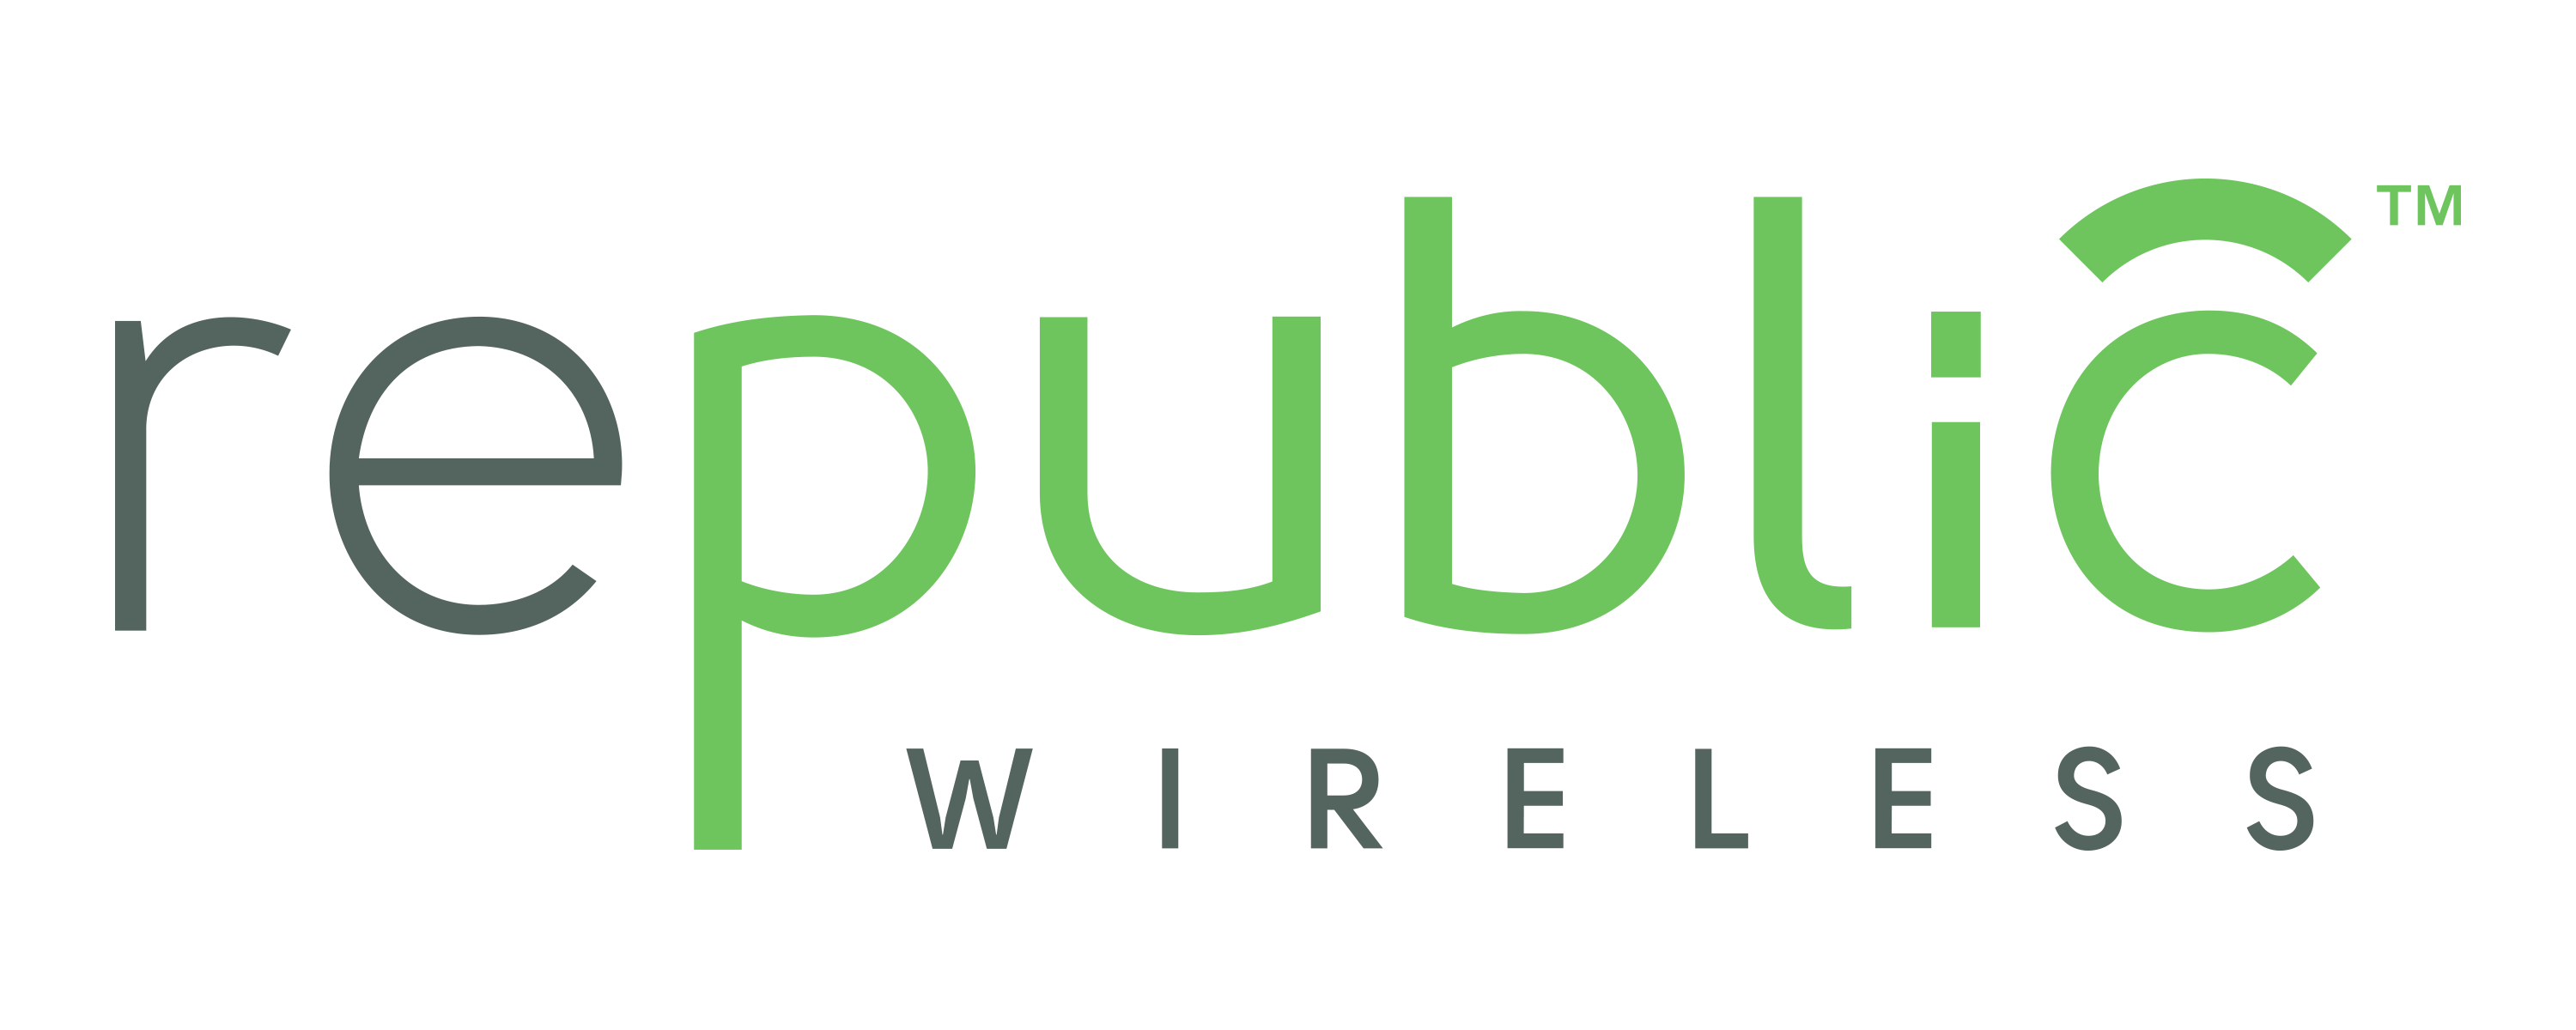 Keeping Families Better Connected: WiFi Calling innovator Republic Wireless offers six month free service for new Bring Your Own Phone activations.